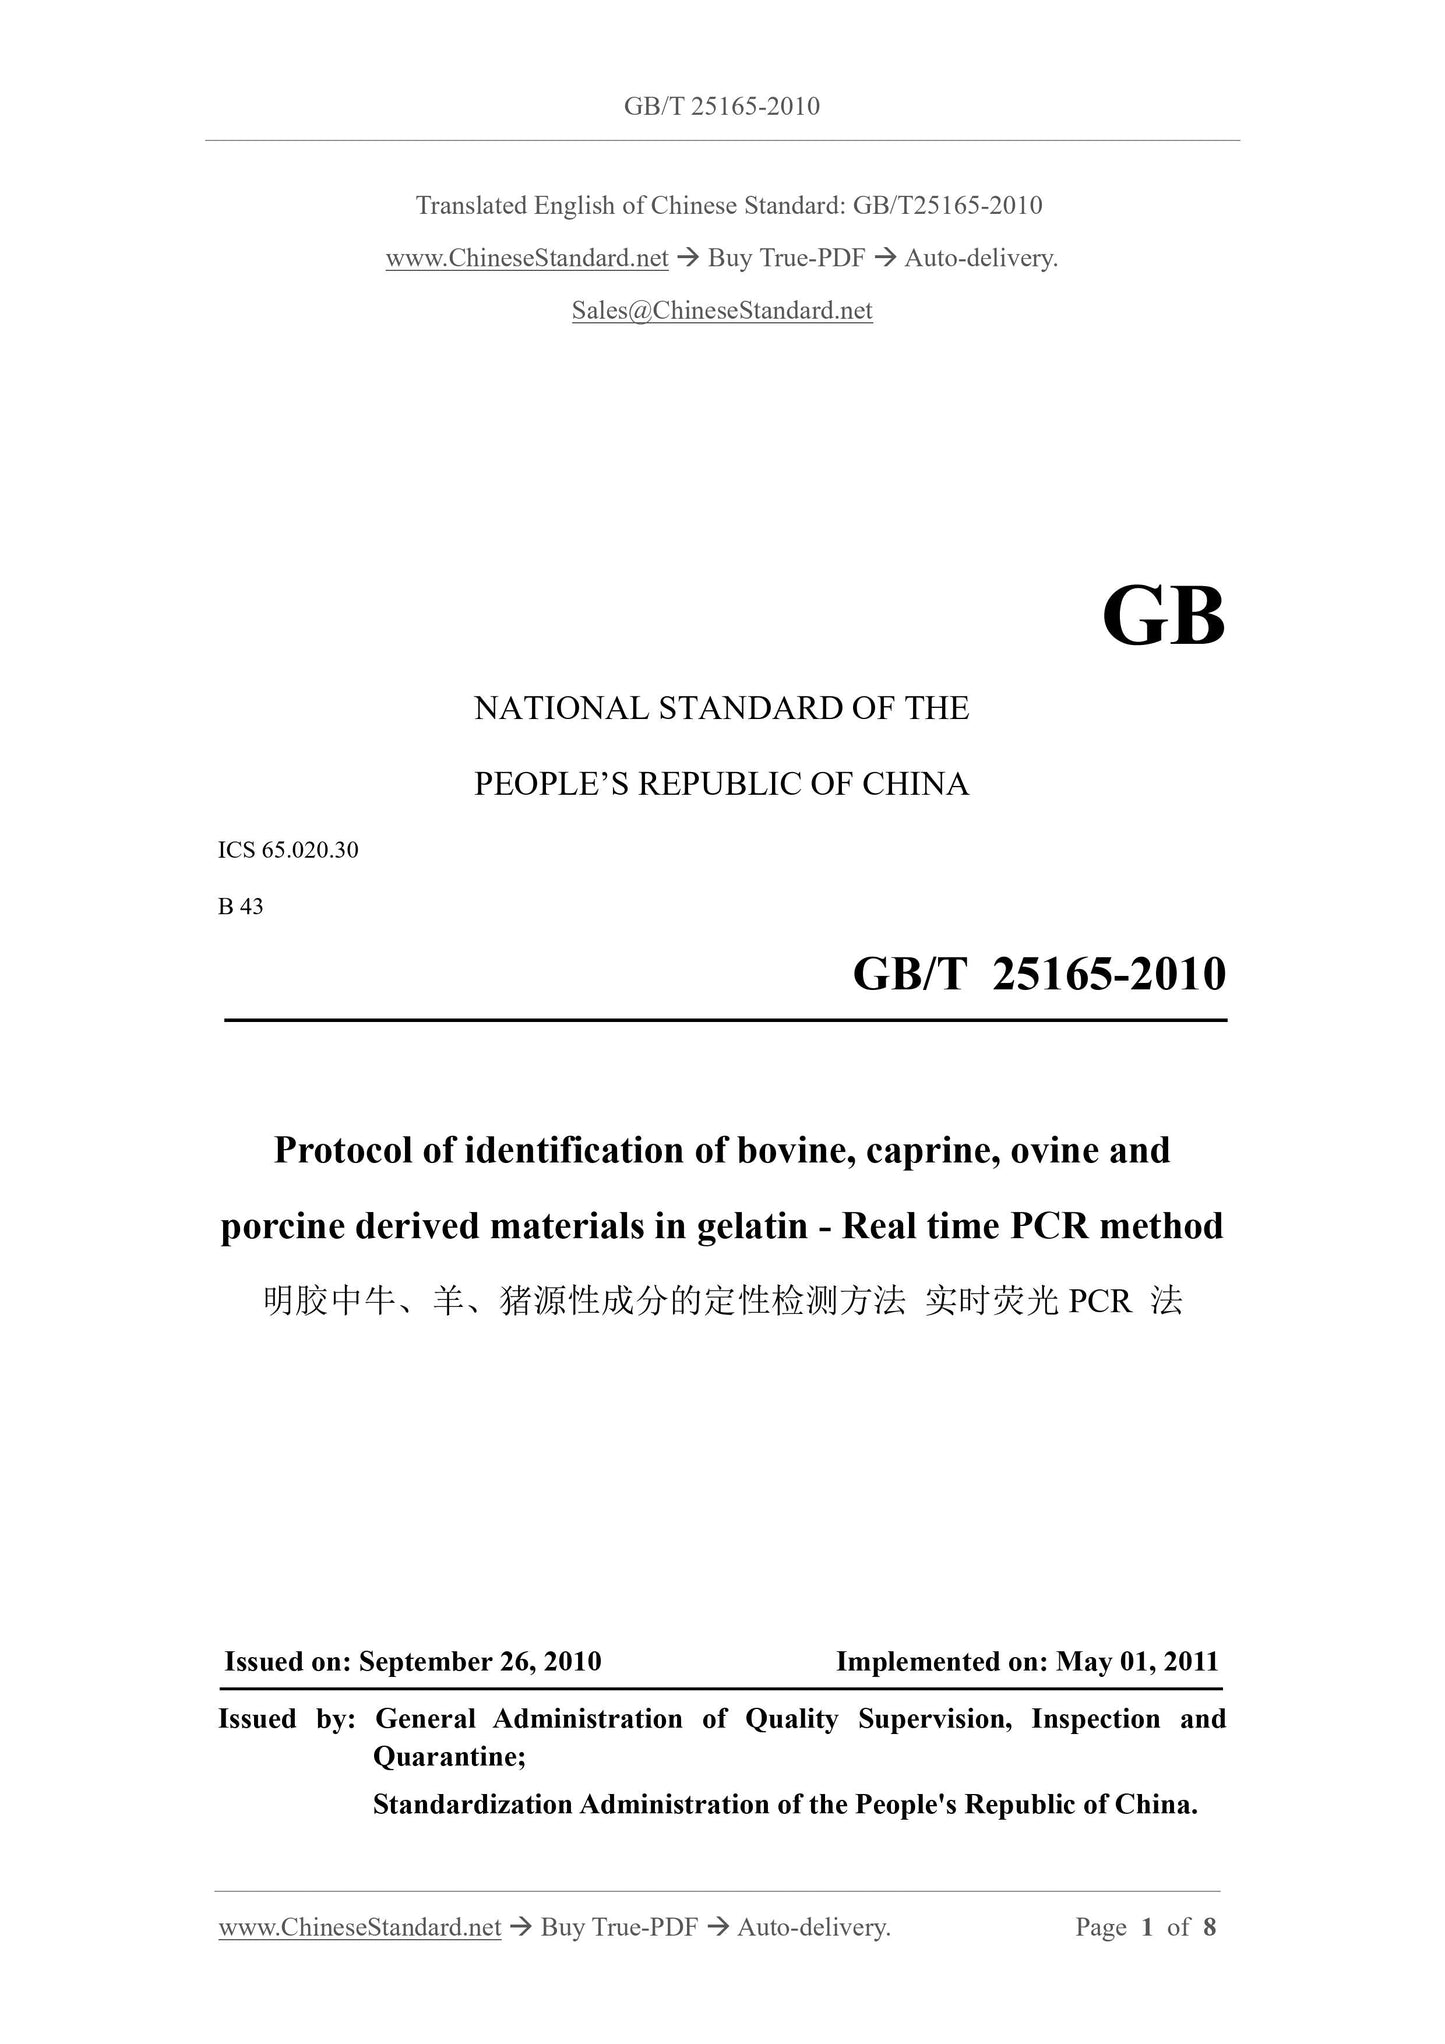 GB/T 25165-2010 Page 1